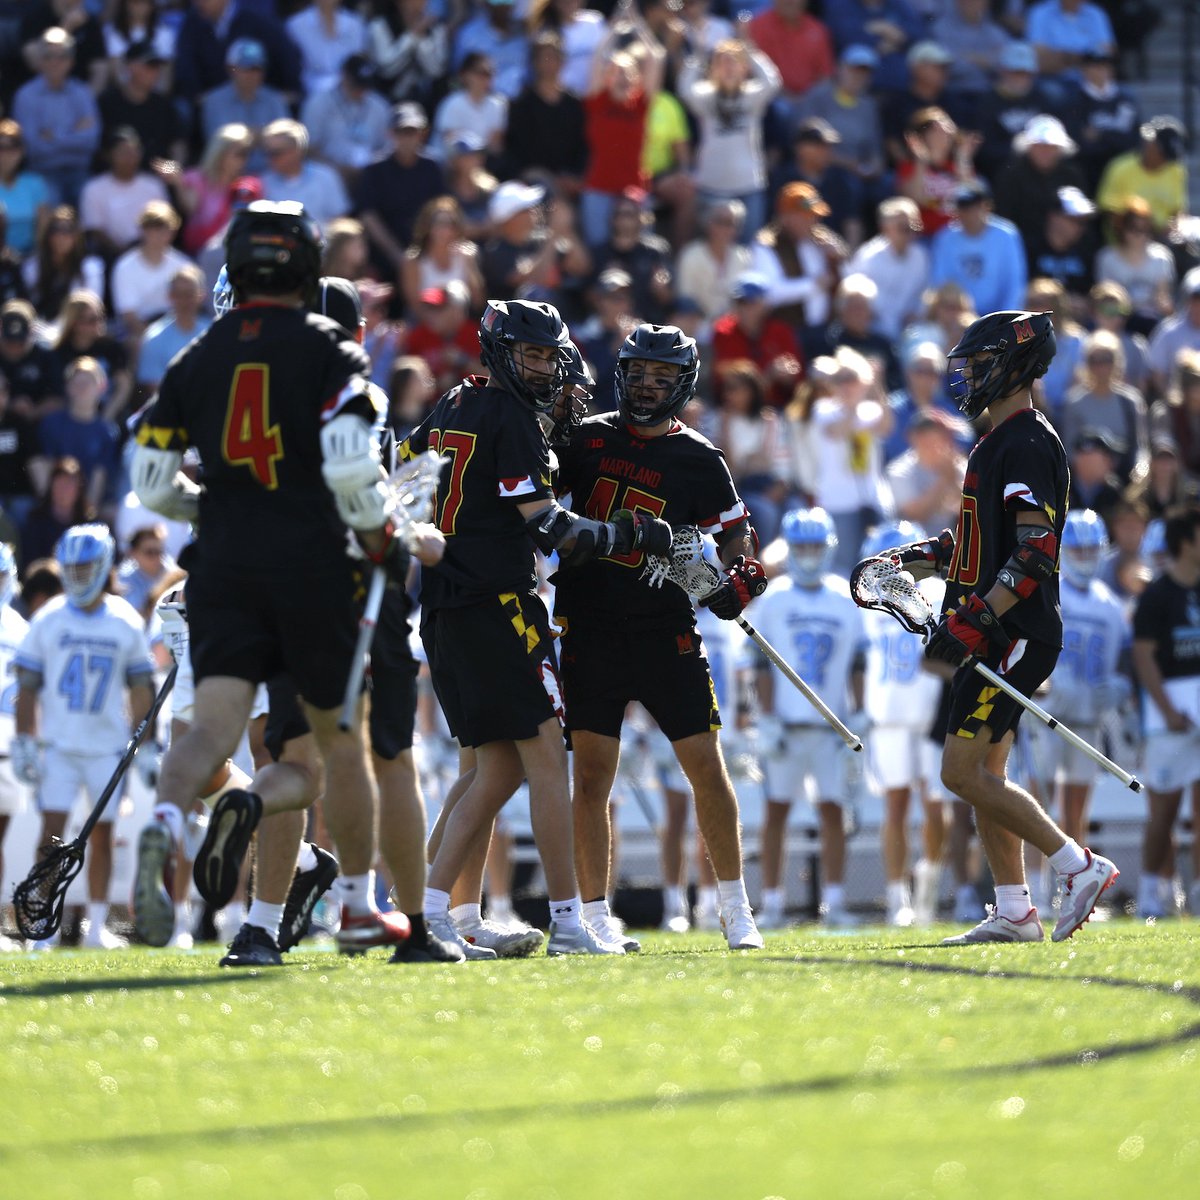 DK gets another back for the Terps! Timeout on the field and still 1:01 remaining on the Maryland EMO #BeTheBest